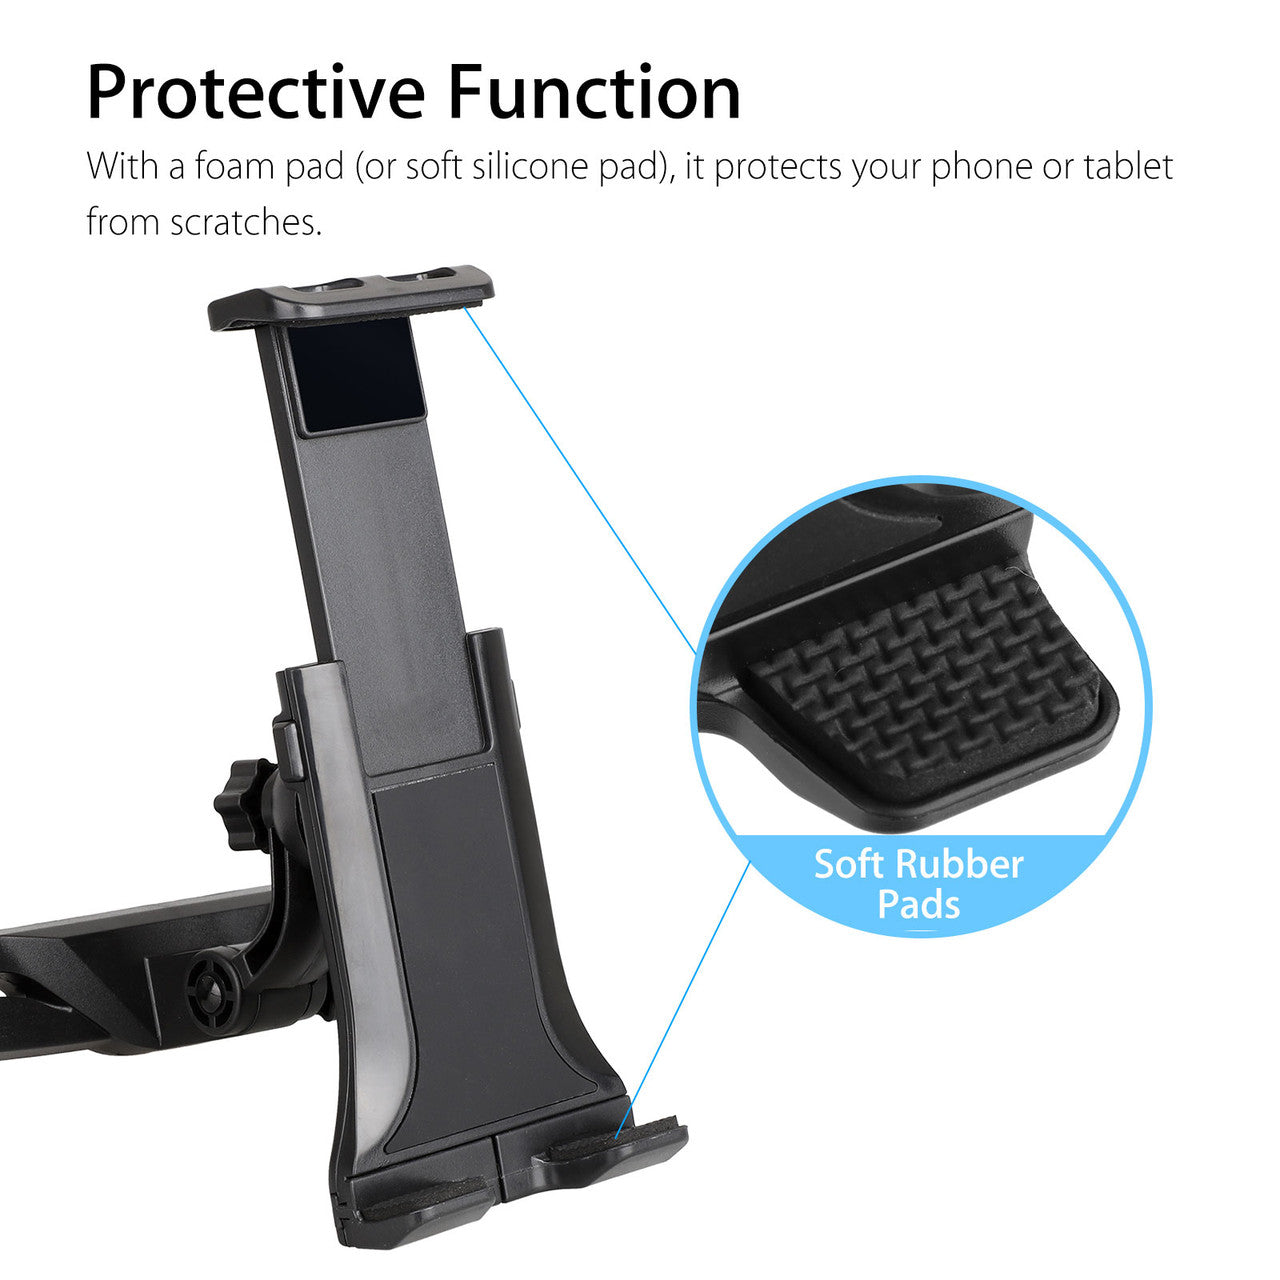 360°Multi-Angle Rotation Car Backseat Seat Holder Sedan Headrest Stand Compatible with iPhone iPad Galaxy Tab Nintendo & 4"- 10" Smartphones and Tablet